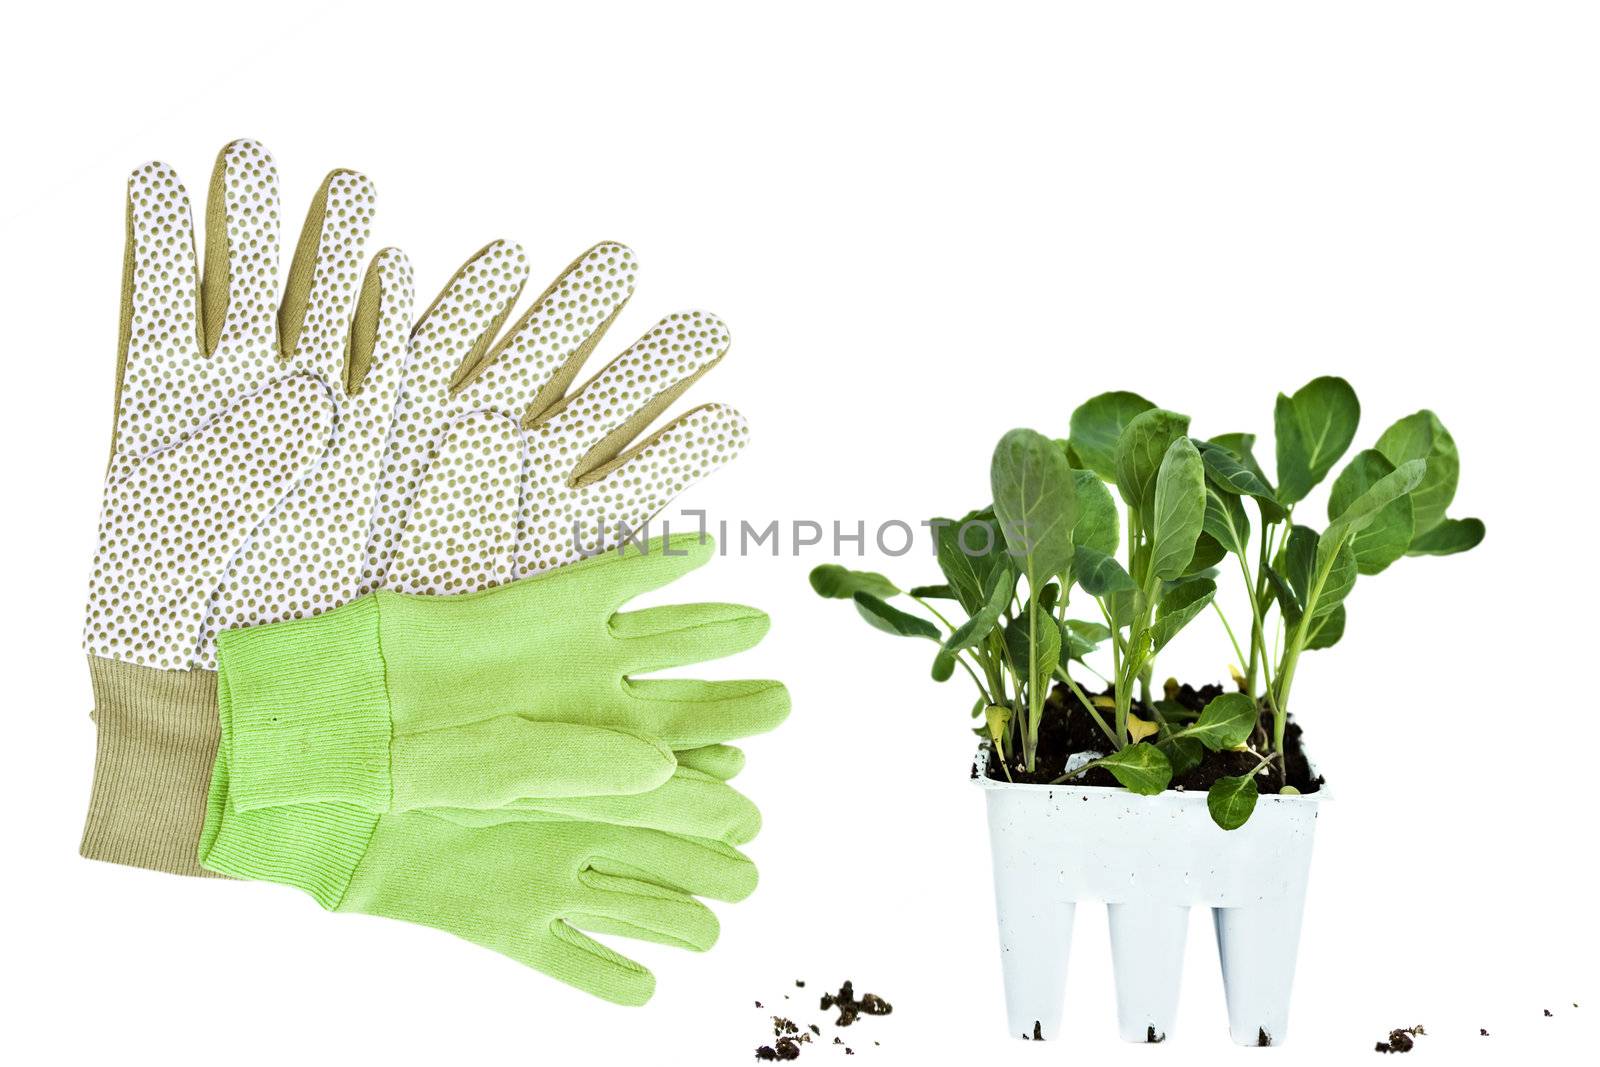 Gardening gloves and plants on a white background.